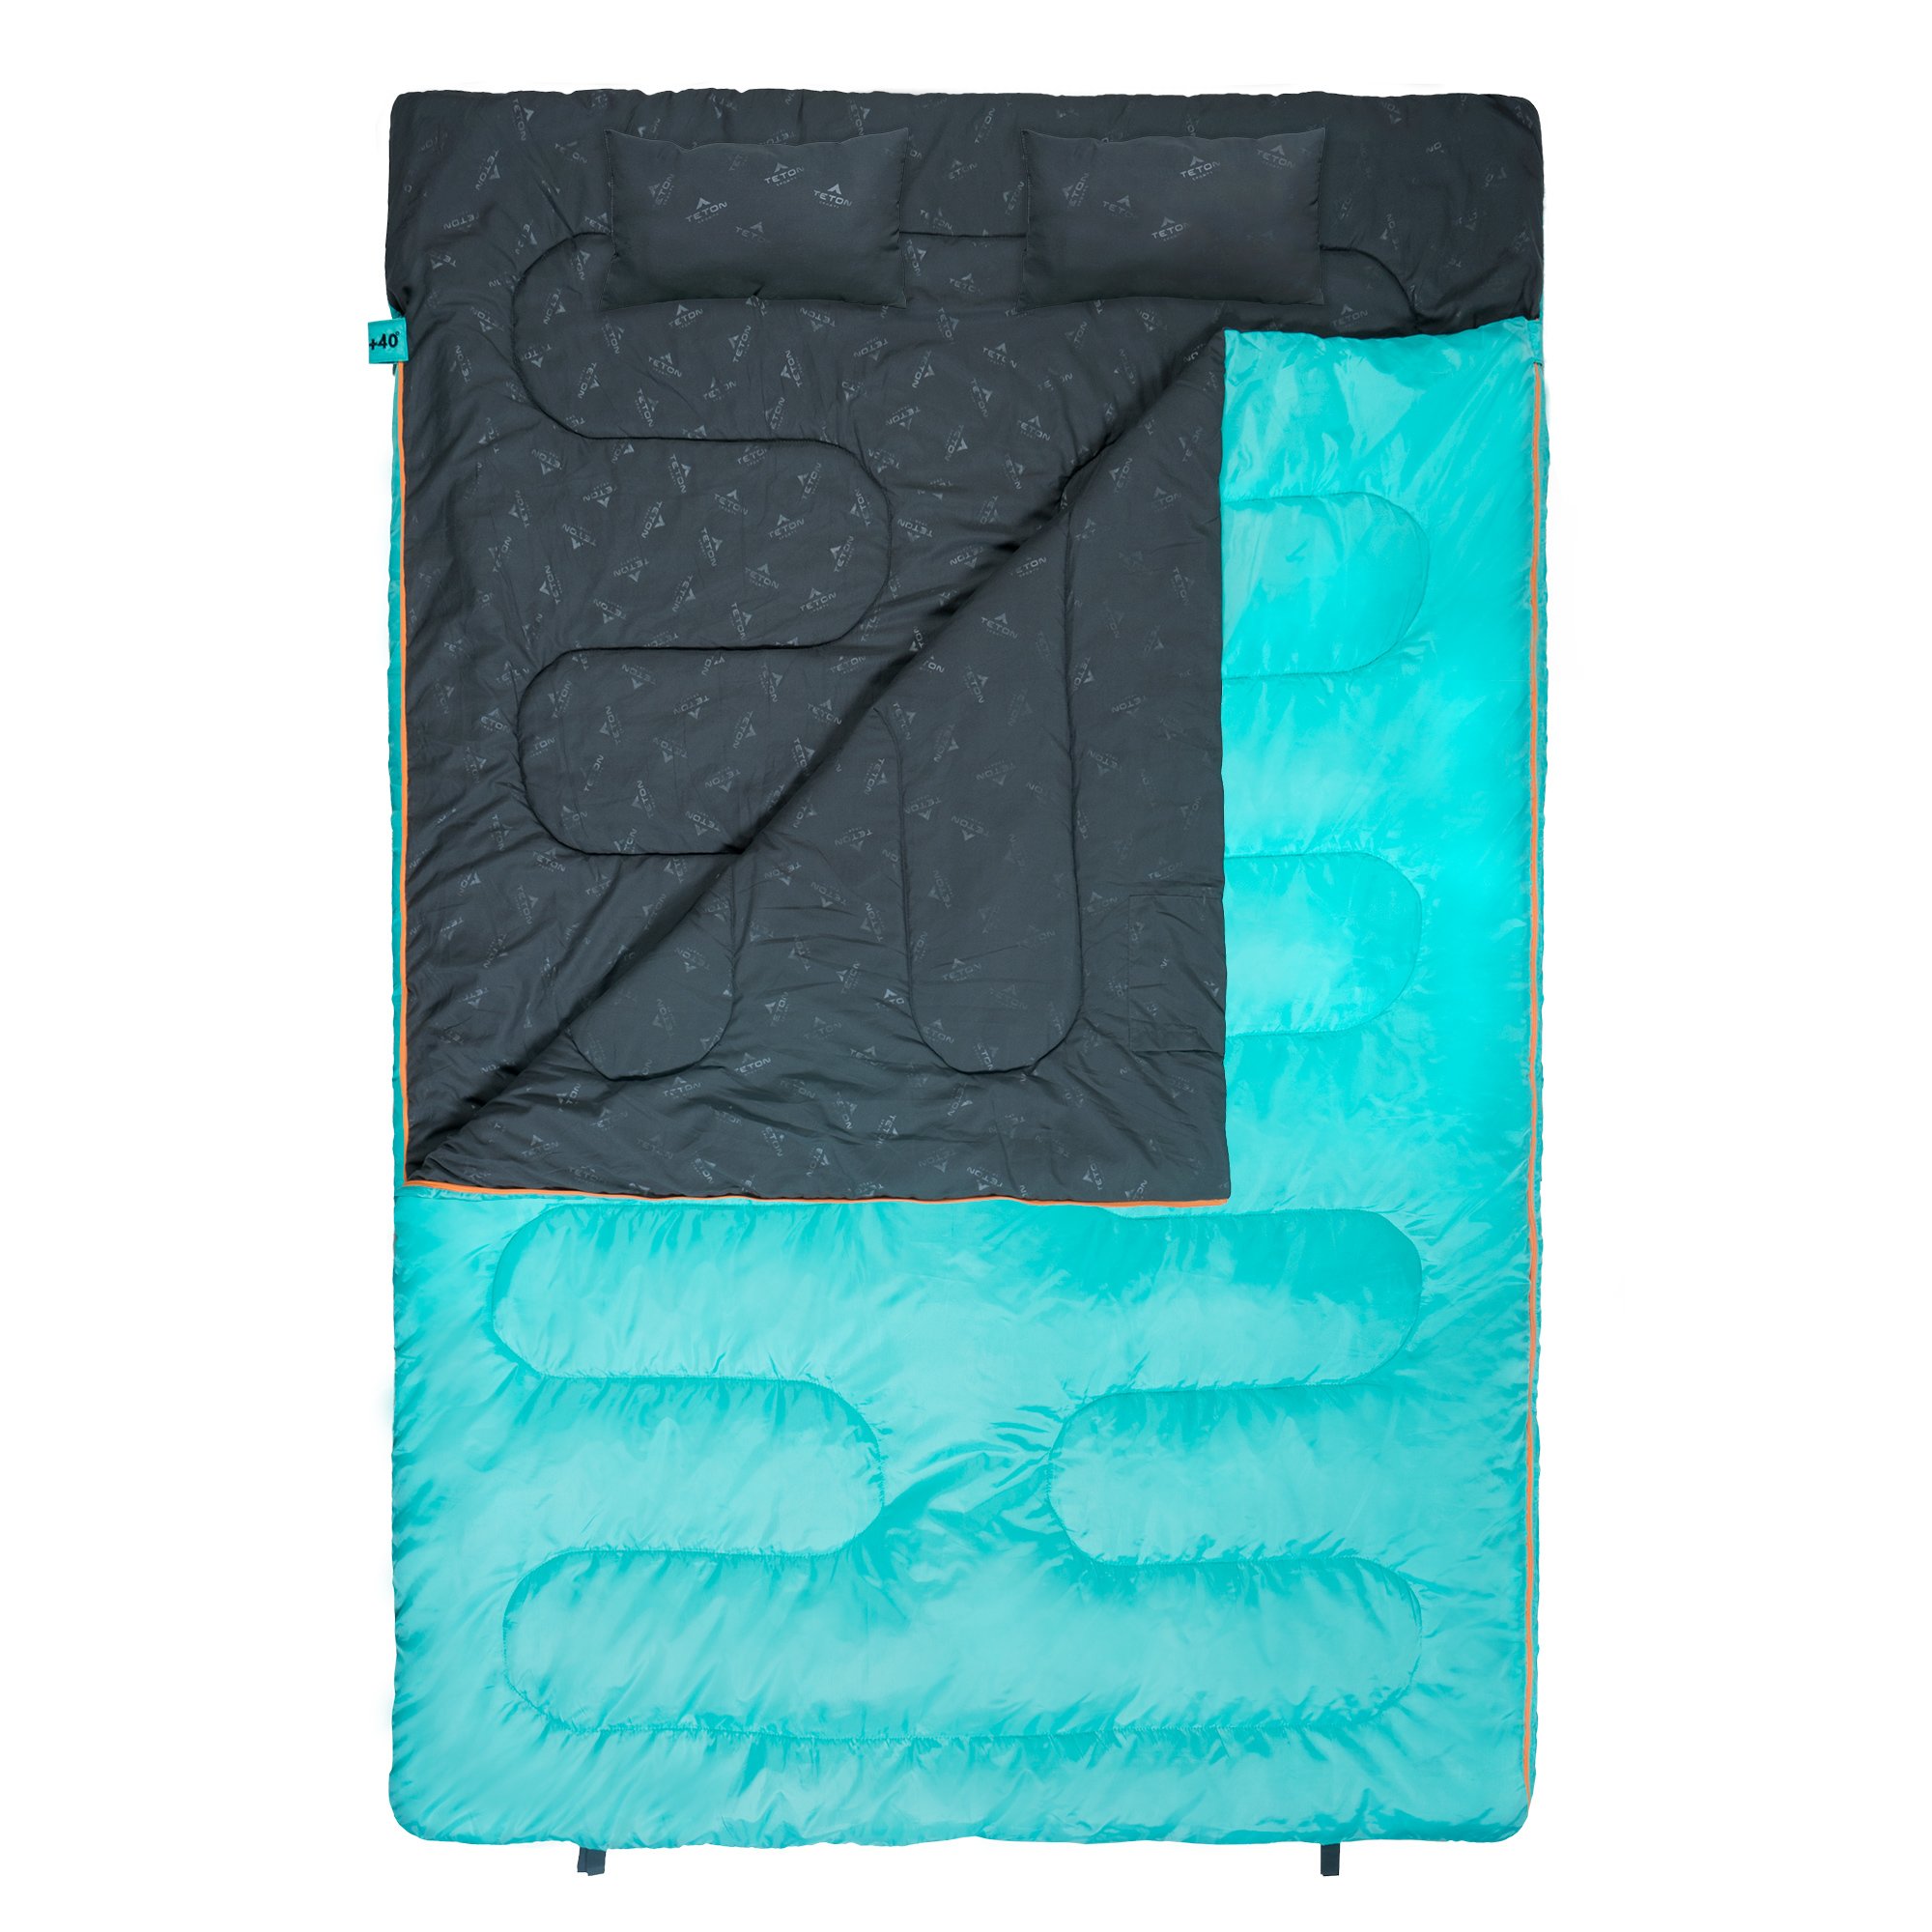 TETON Sports Cascade Double Sleeping Bag for Adults, Lightweight, Great for Family Camping - image 1 of 6